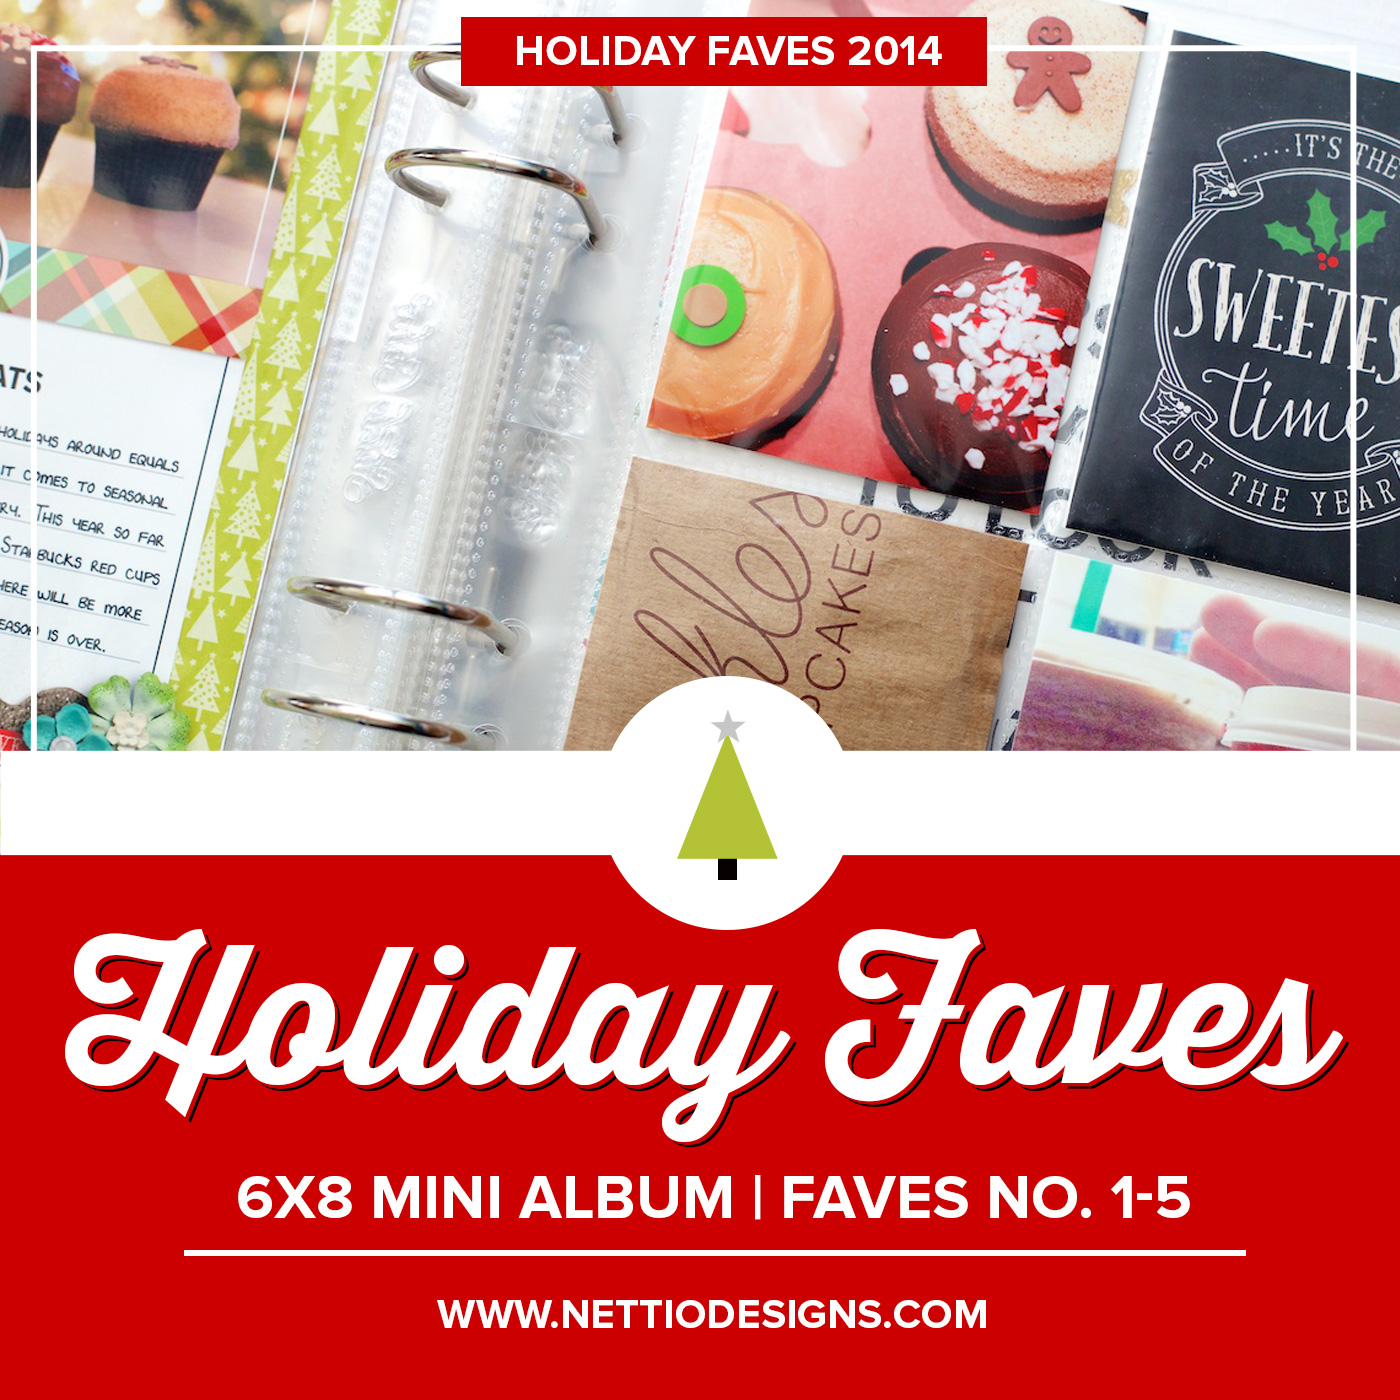 nettiodesigns_Holiday-Faves-2014-intro-15